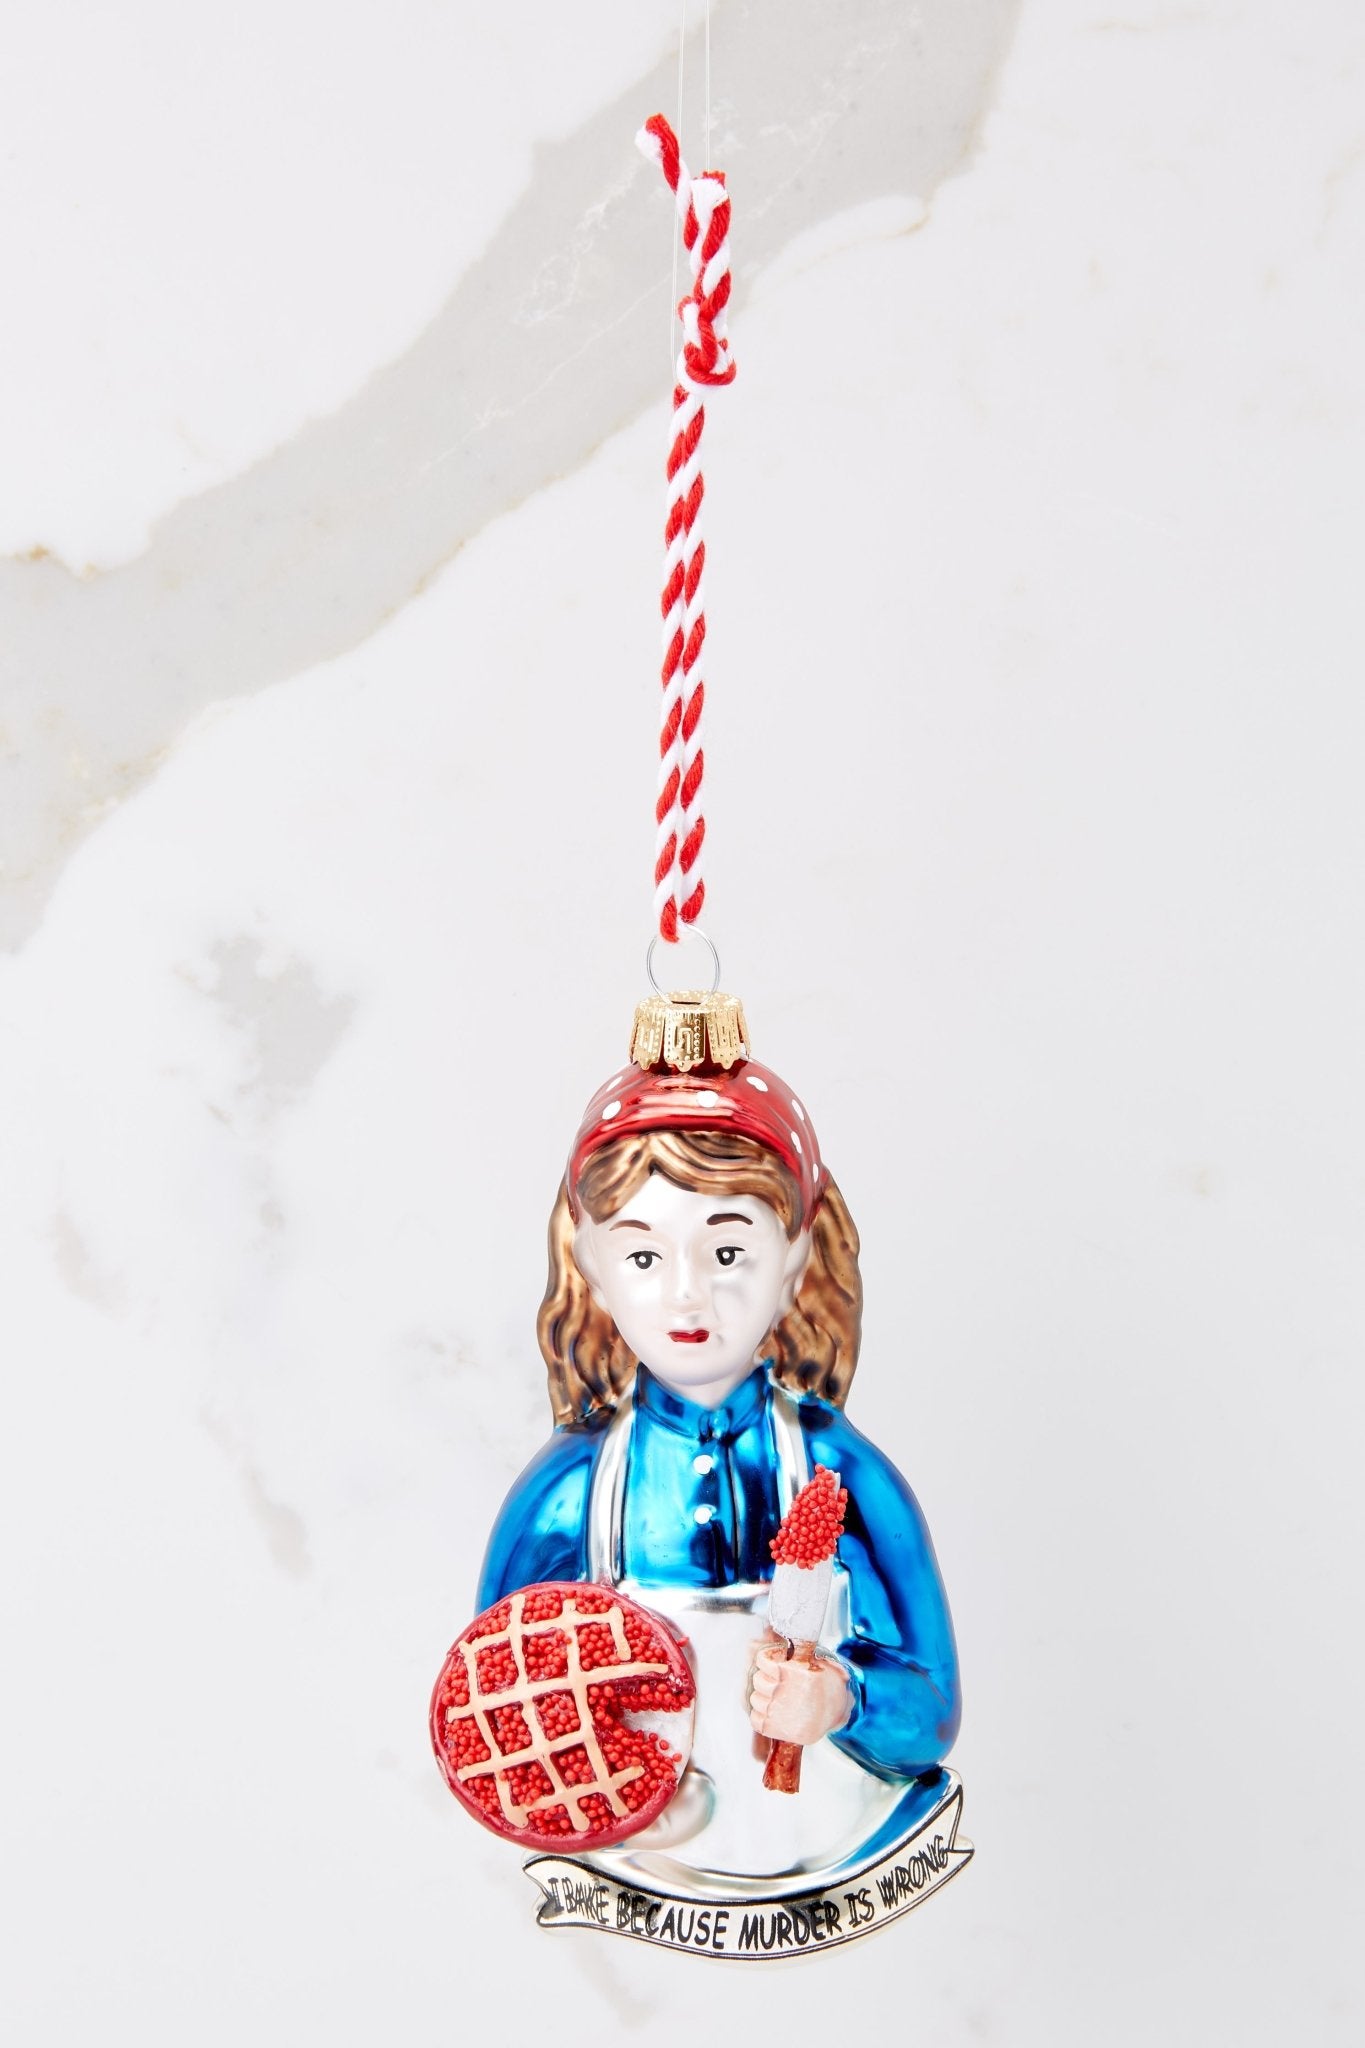 I Bake Because Murder Is Wrong Ornament - Red Dress